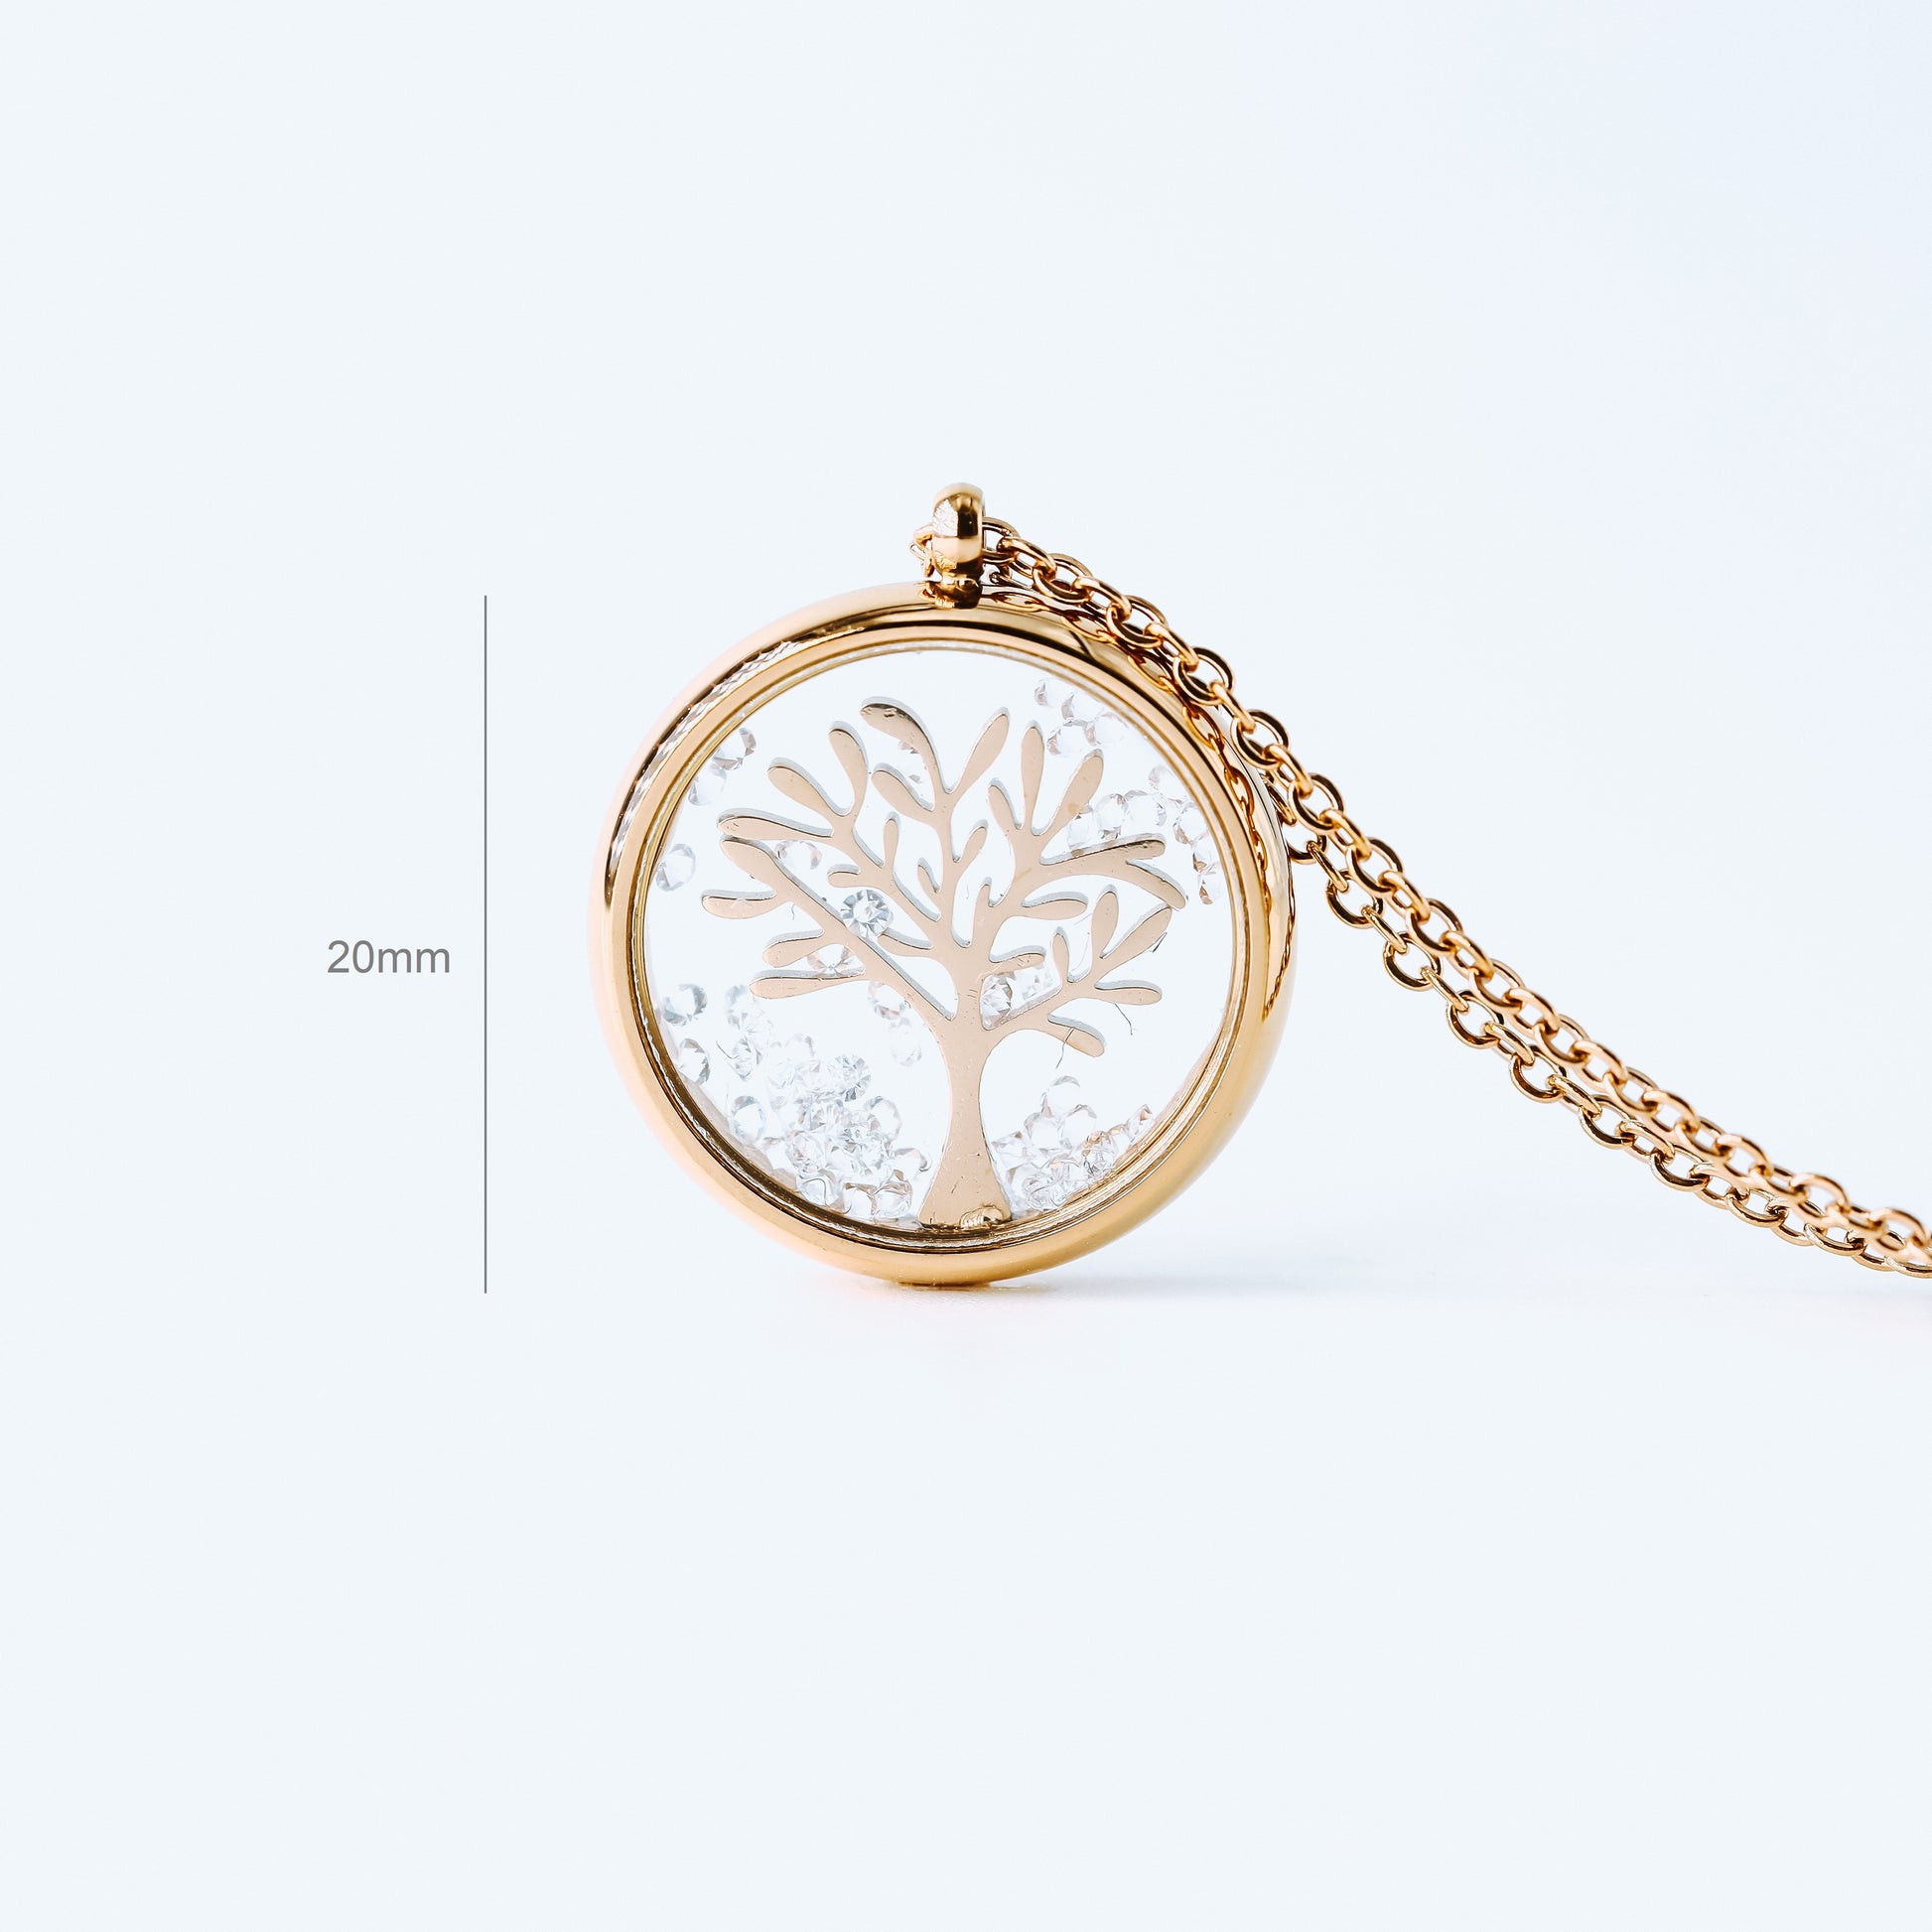 Dainty Tree of Life Necklace • Stainless Steel Family Tree Pendant • Family Tree Jewelry for Her, Arbre de Vie • Gift For Mom and Grandma